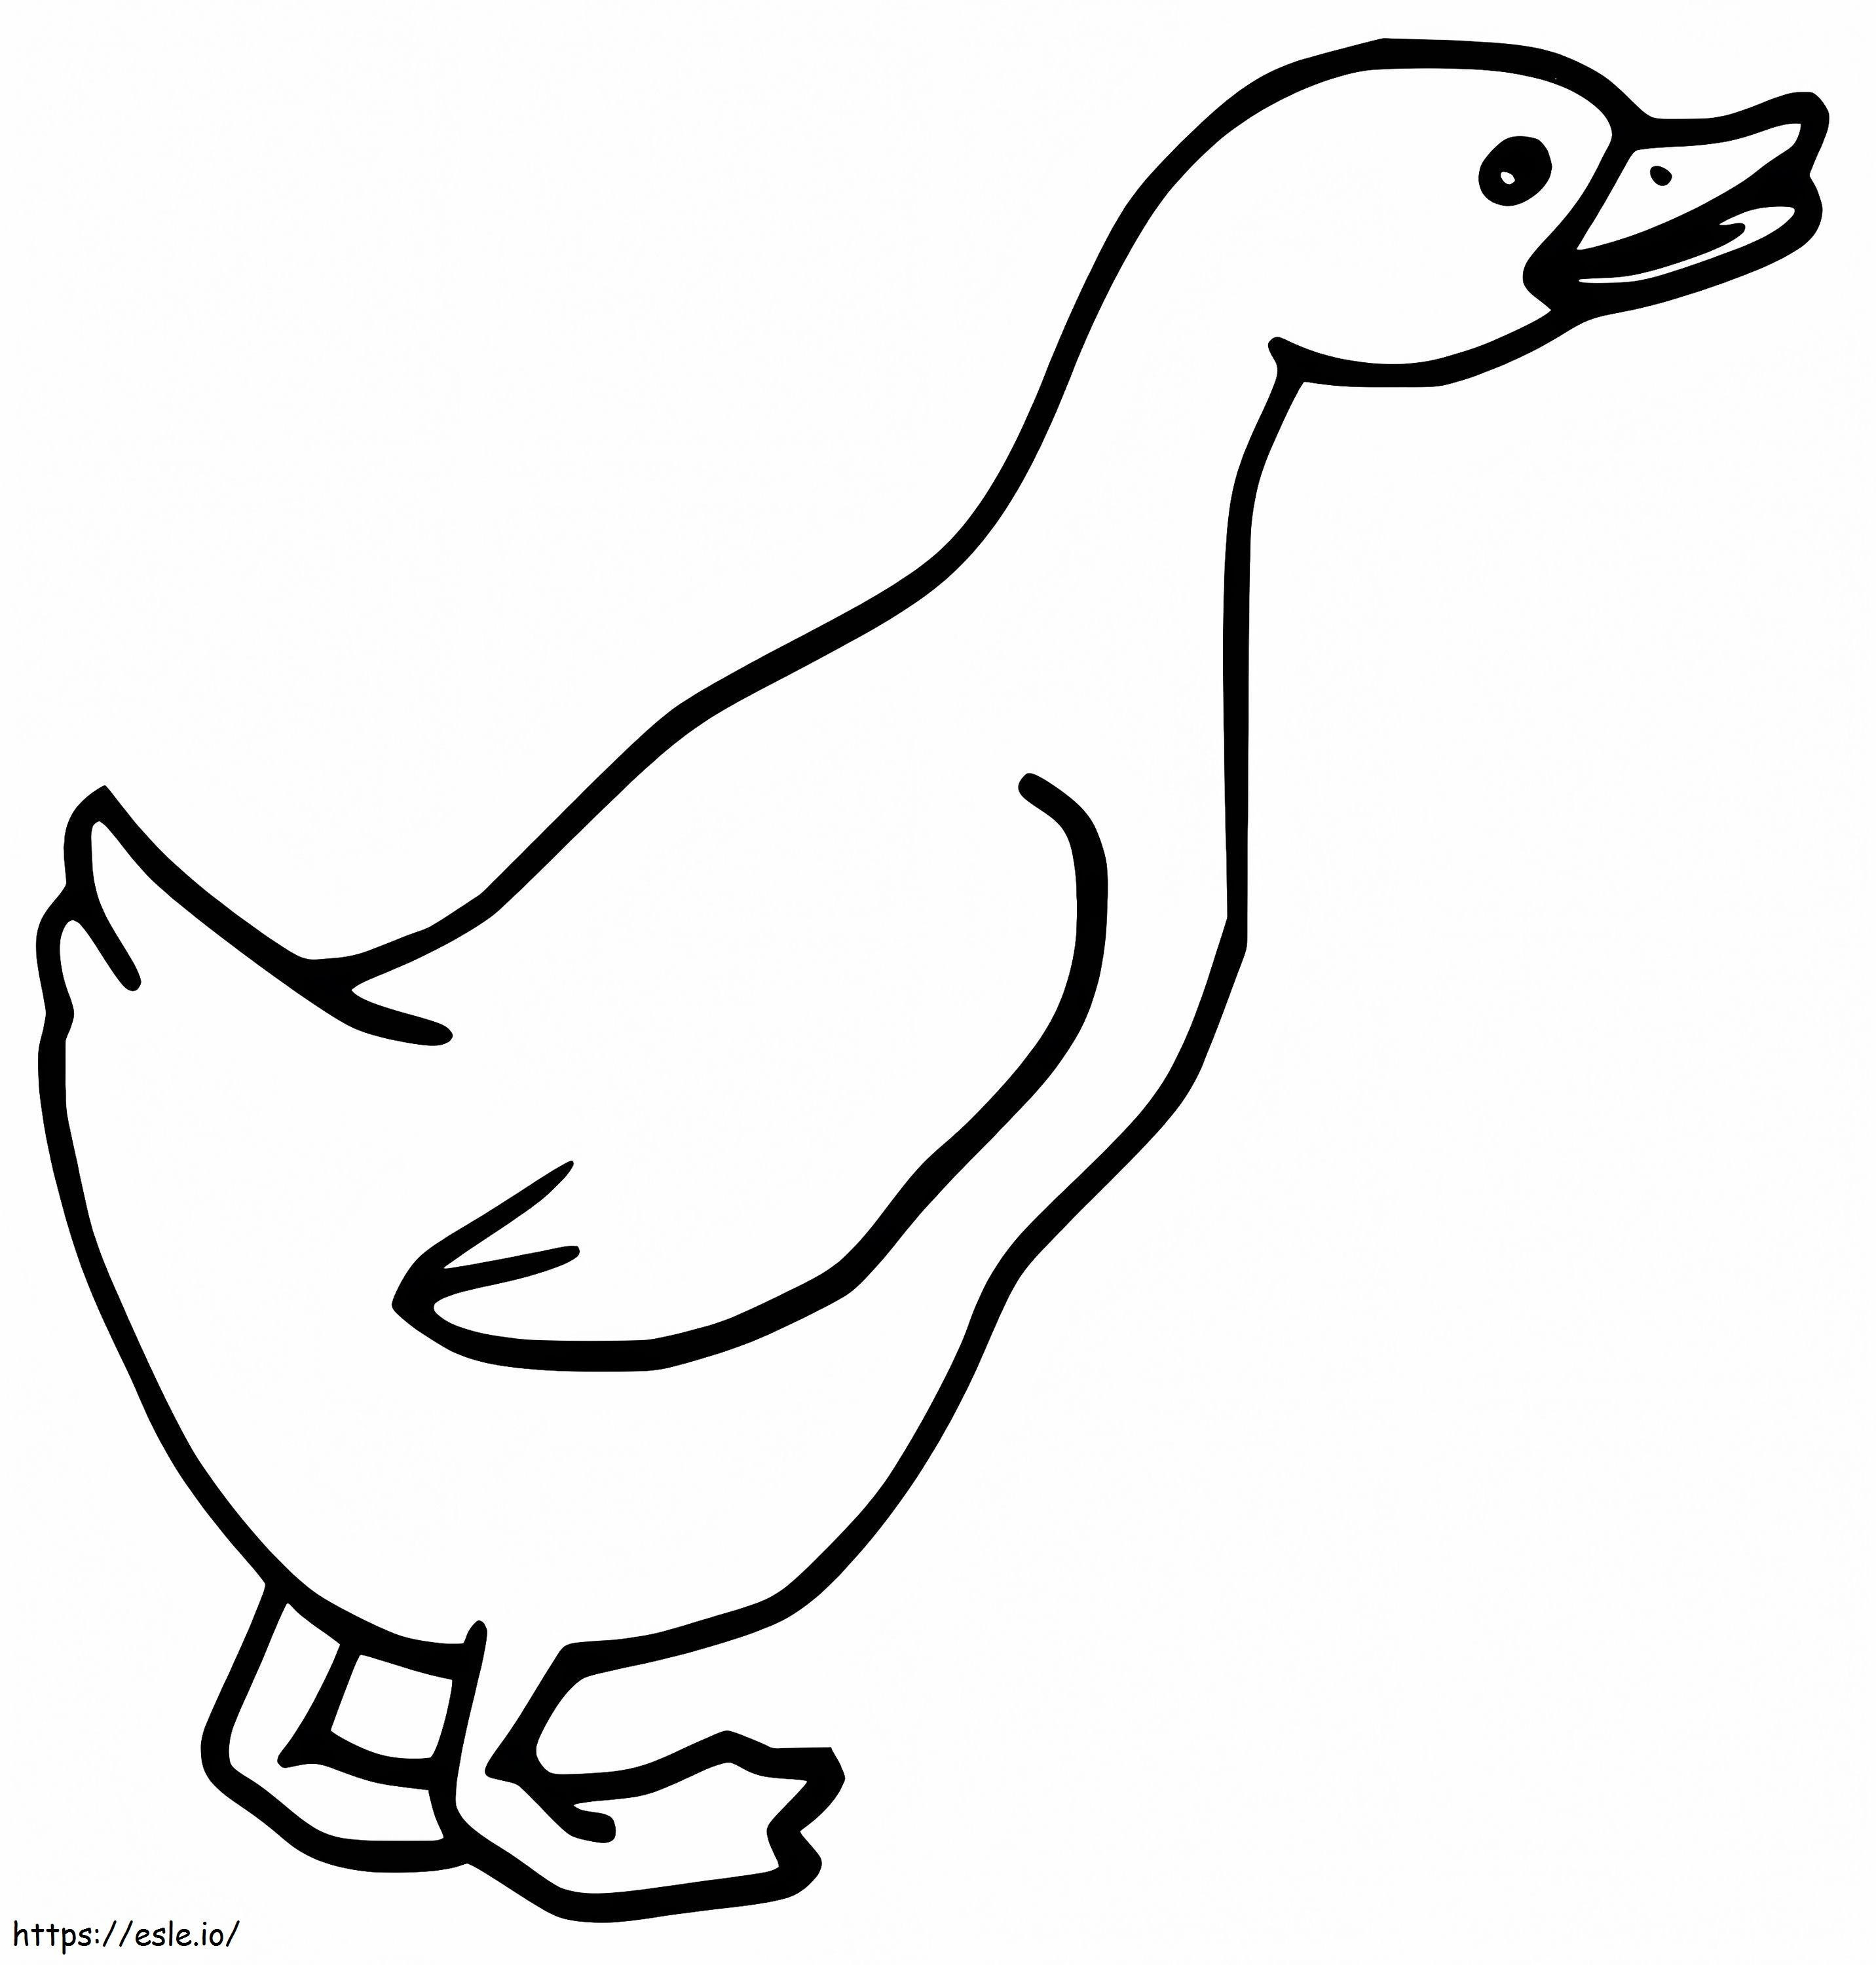 Goose 10 coloring page